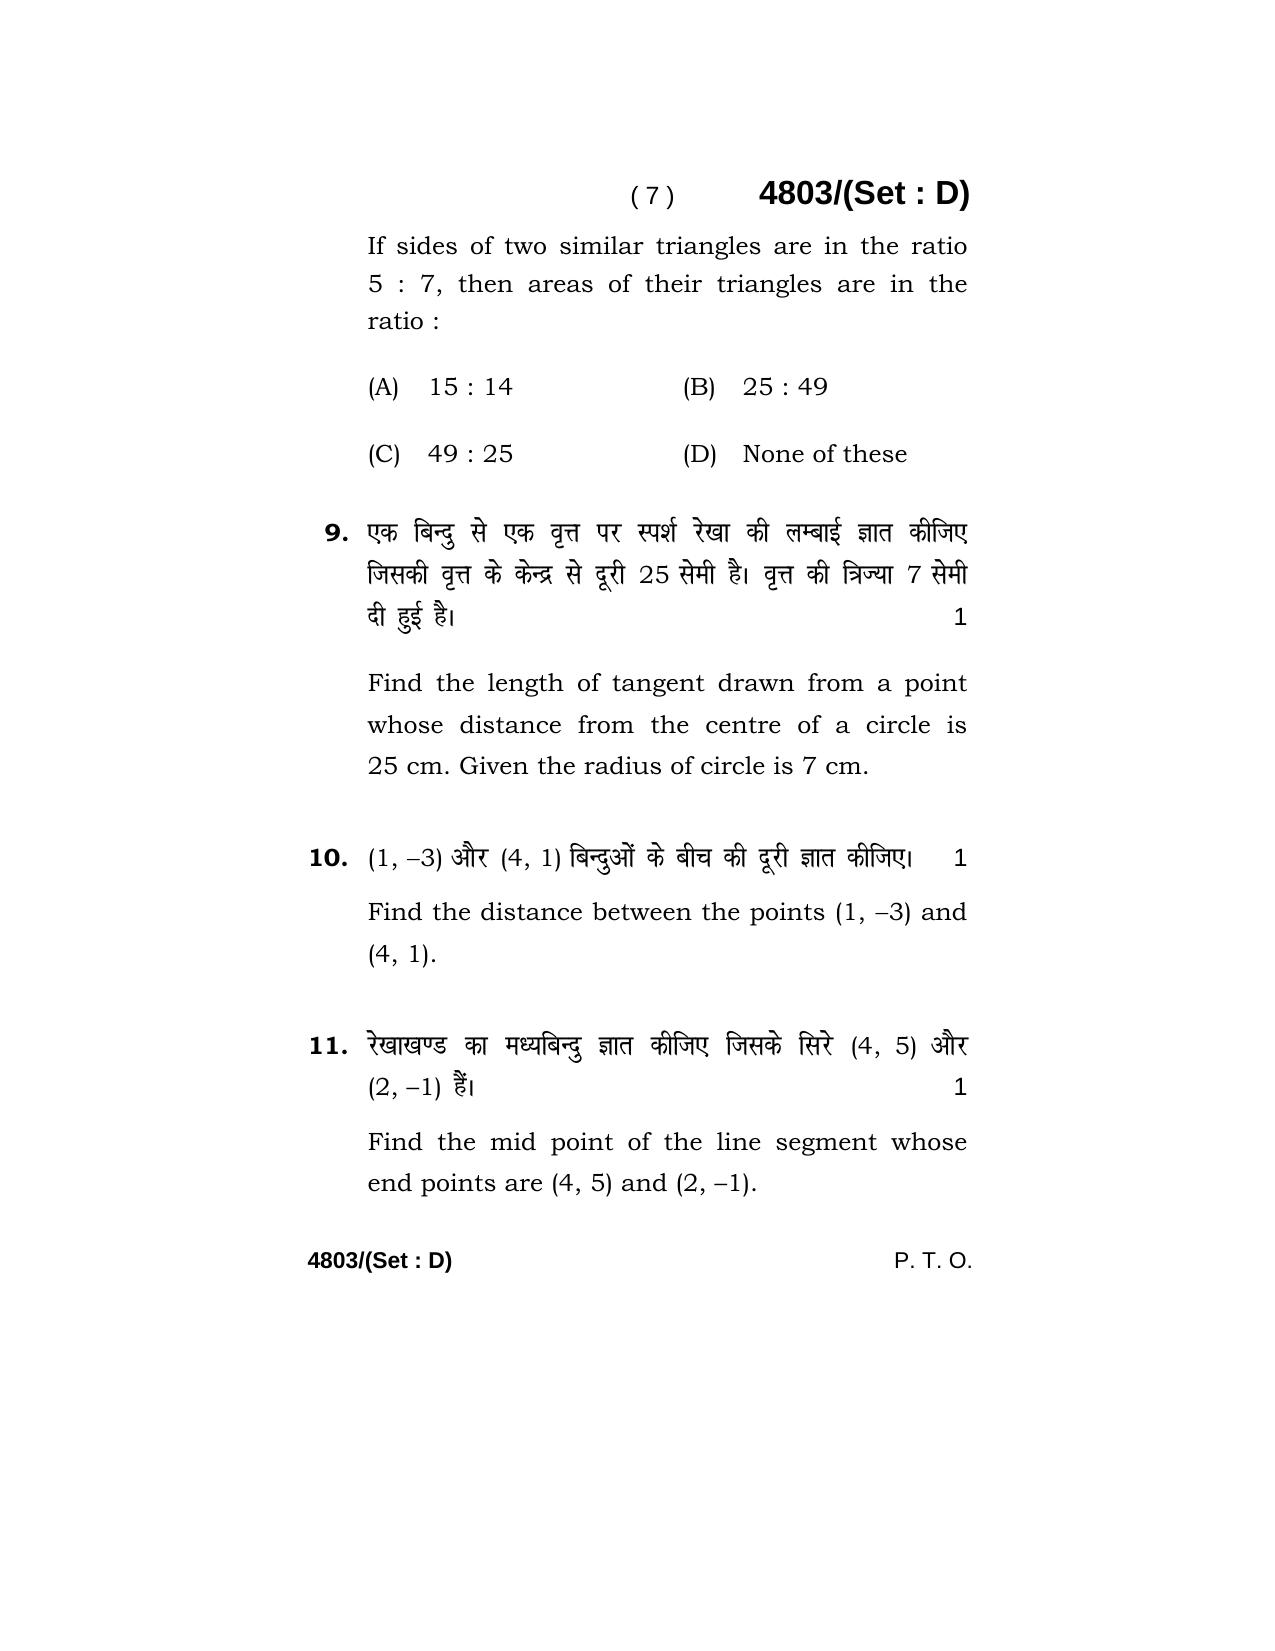 Haryana Board HBSE Class 10 Mathematics 2020 Question Paper - Page 55